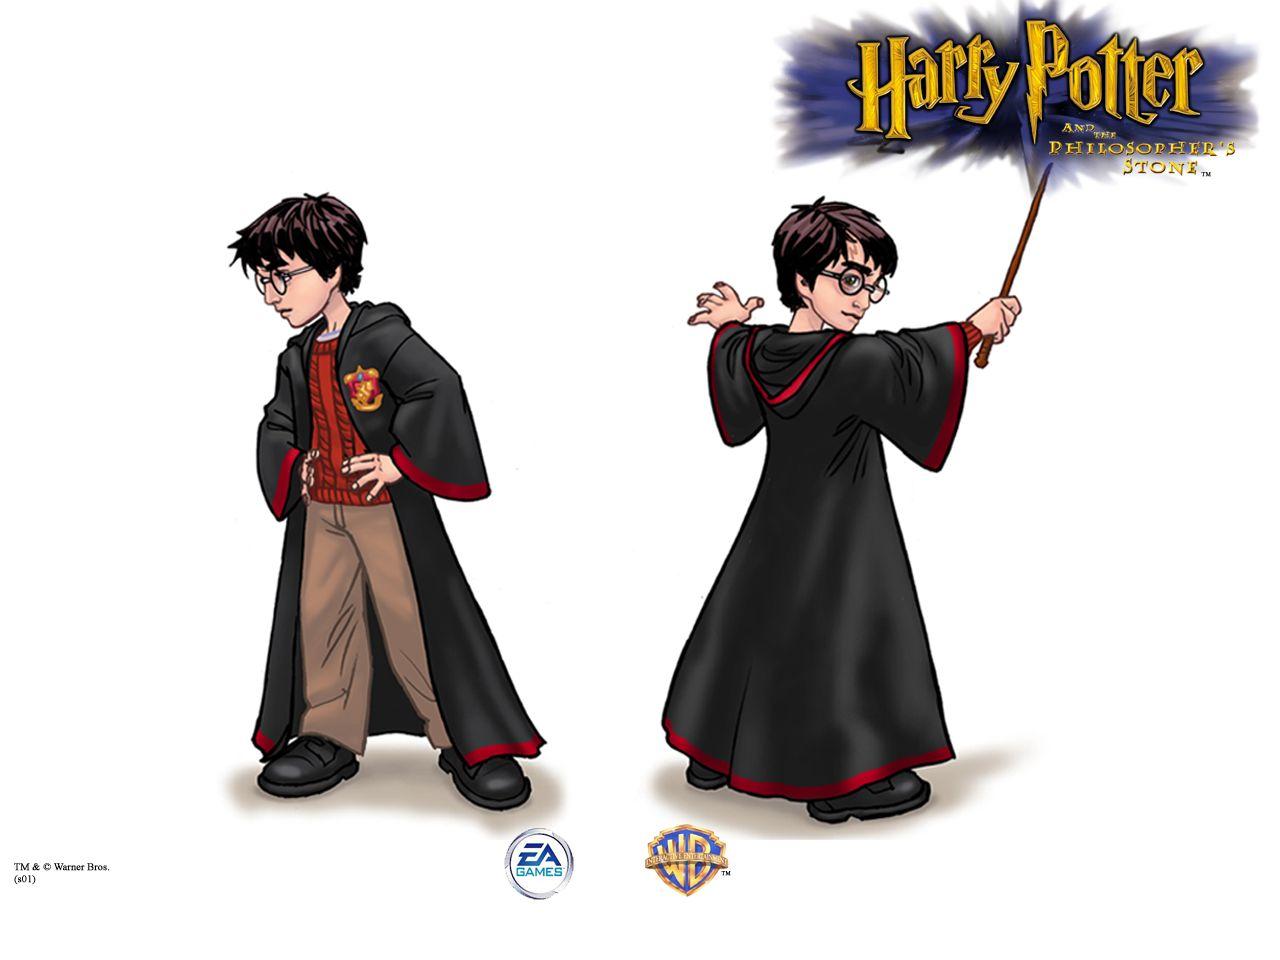 Harry Potter and the Sorcerer's Stone (2002) promotional art